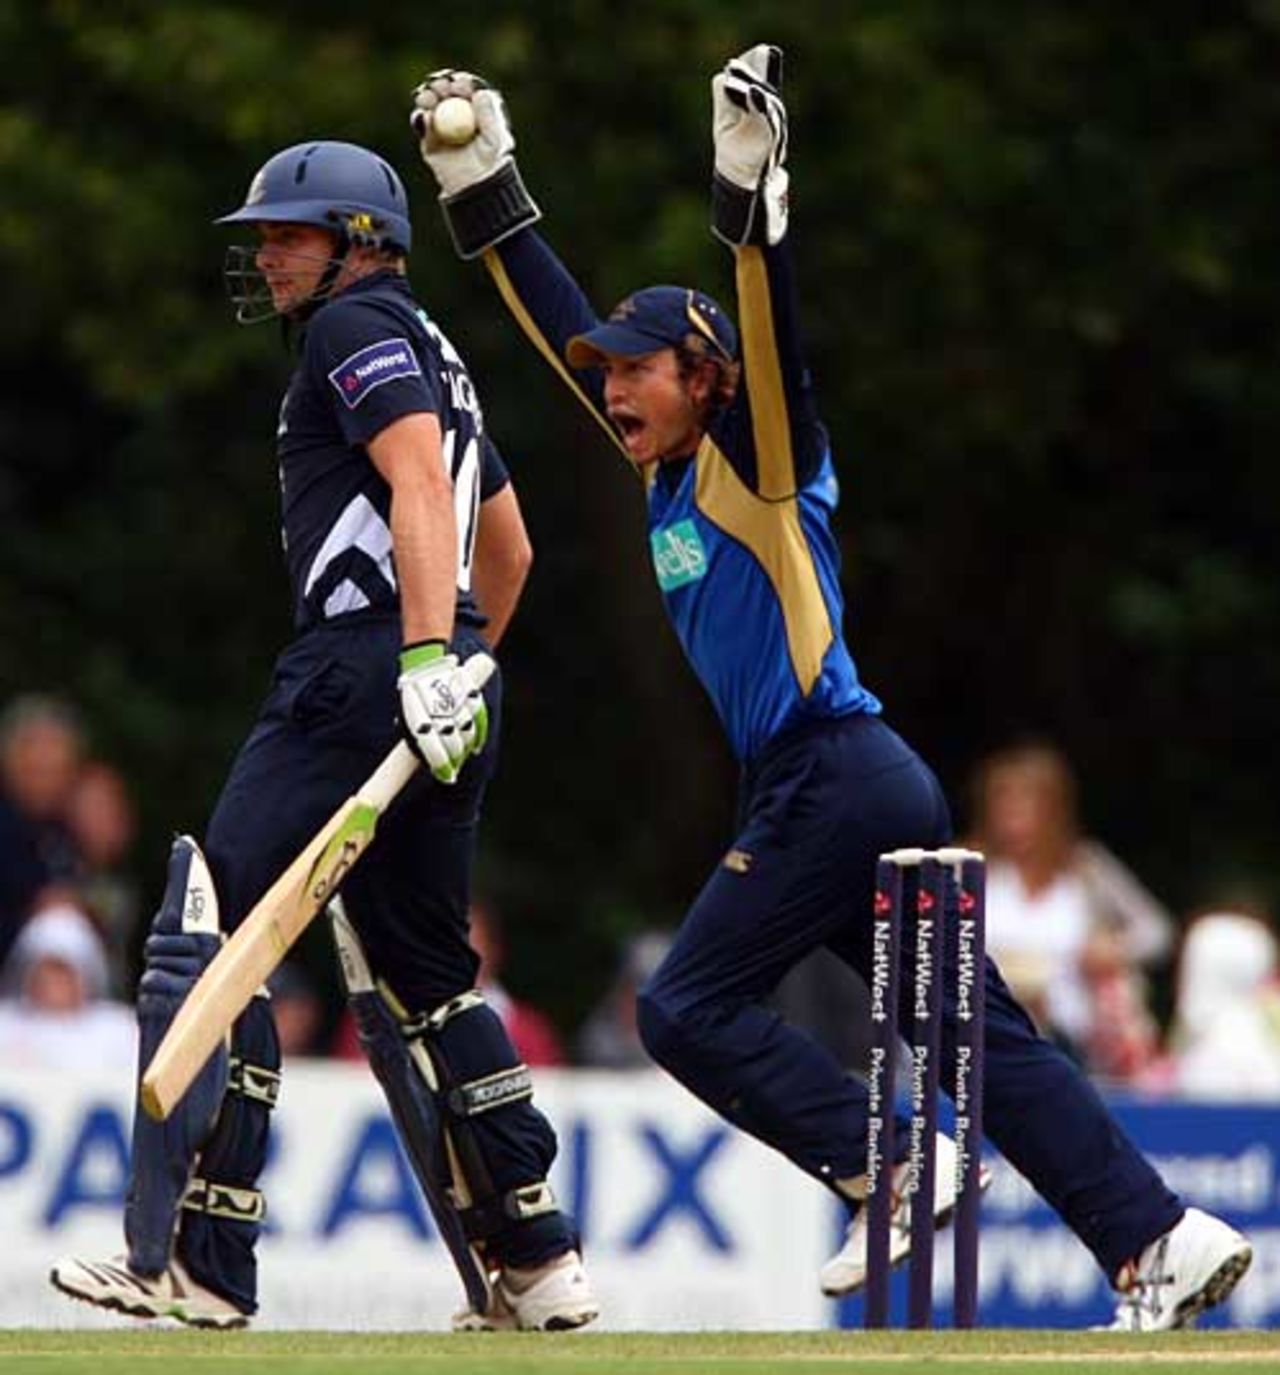 Tom Burrows goes up for a catch to remove Luke Wright, Sussex v Hampshire, Pro40 Division One, Arundel, July 19, 2009